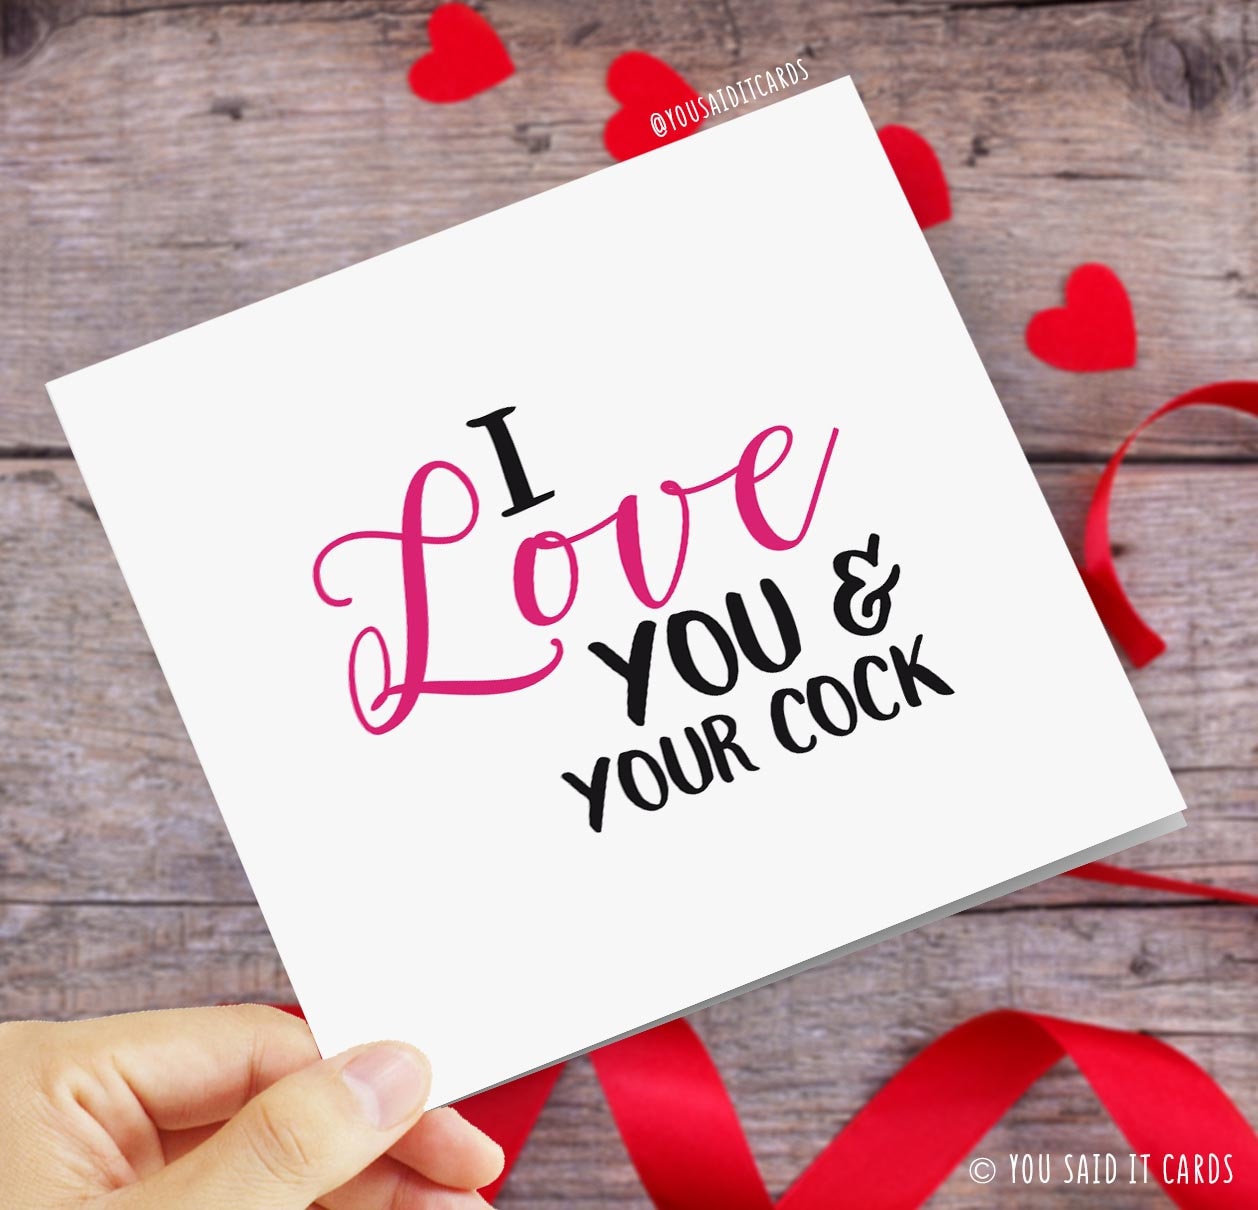 I Love You And Your Cock Funny Rude Offensive Greeting Cards Etsy